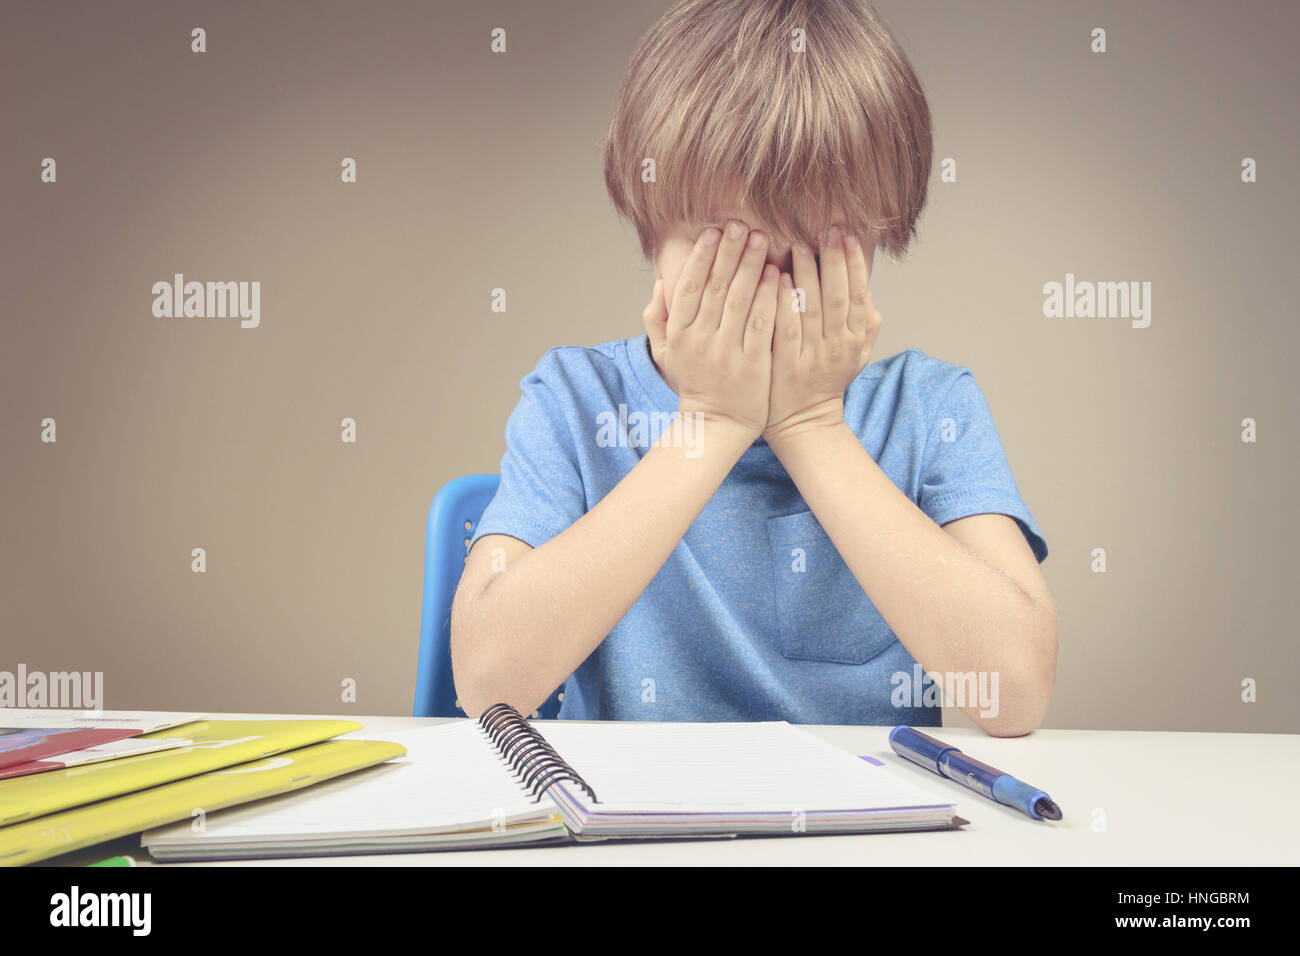 Tired sad child doing homework at home. The boy fed up and covers his face with hands. Education, school, learning difficulties concept Stock Photo